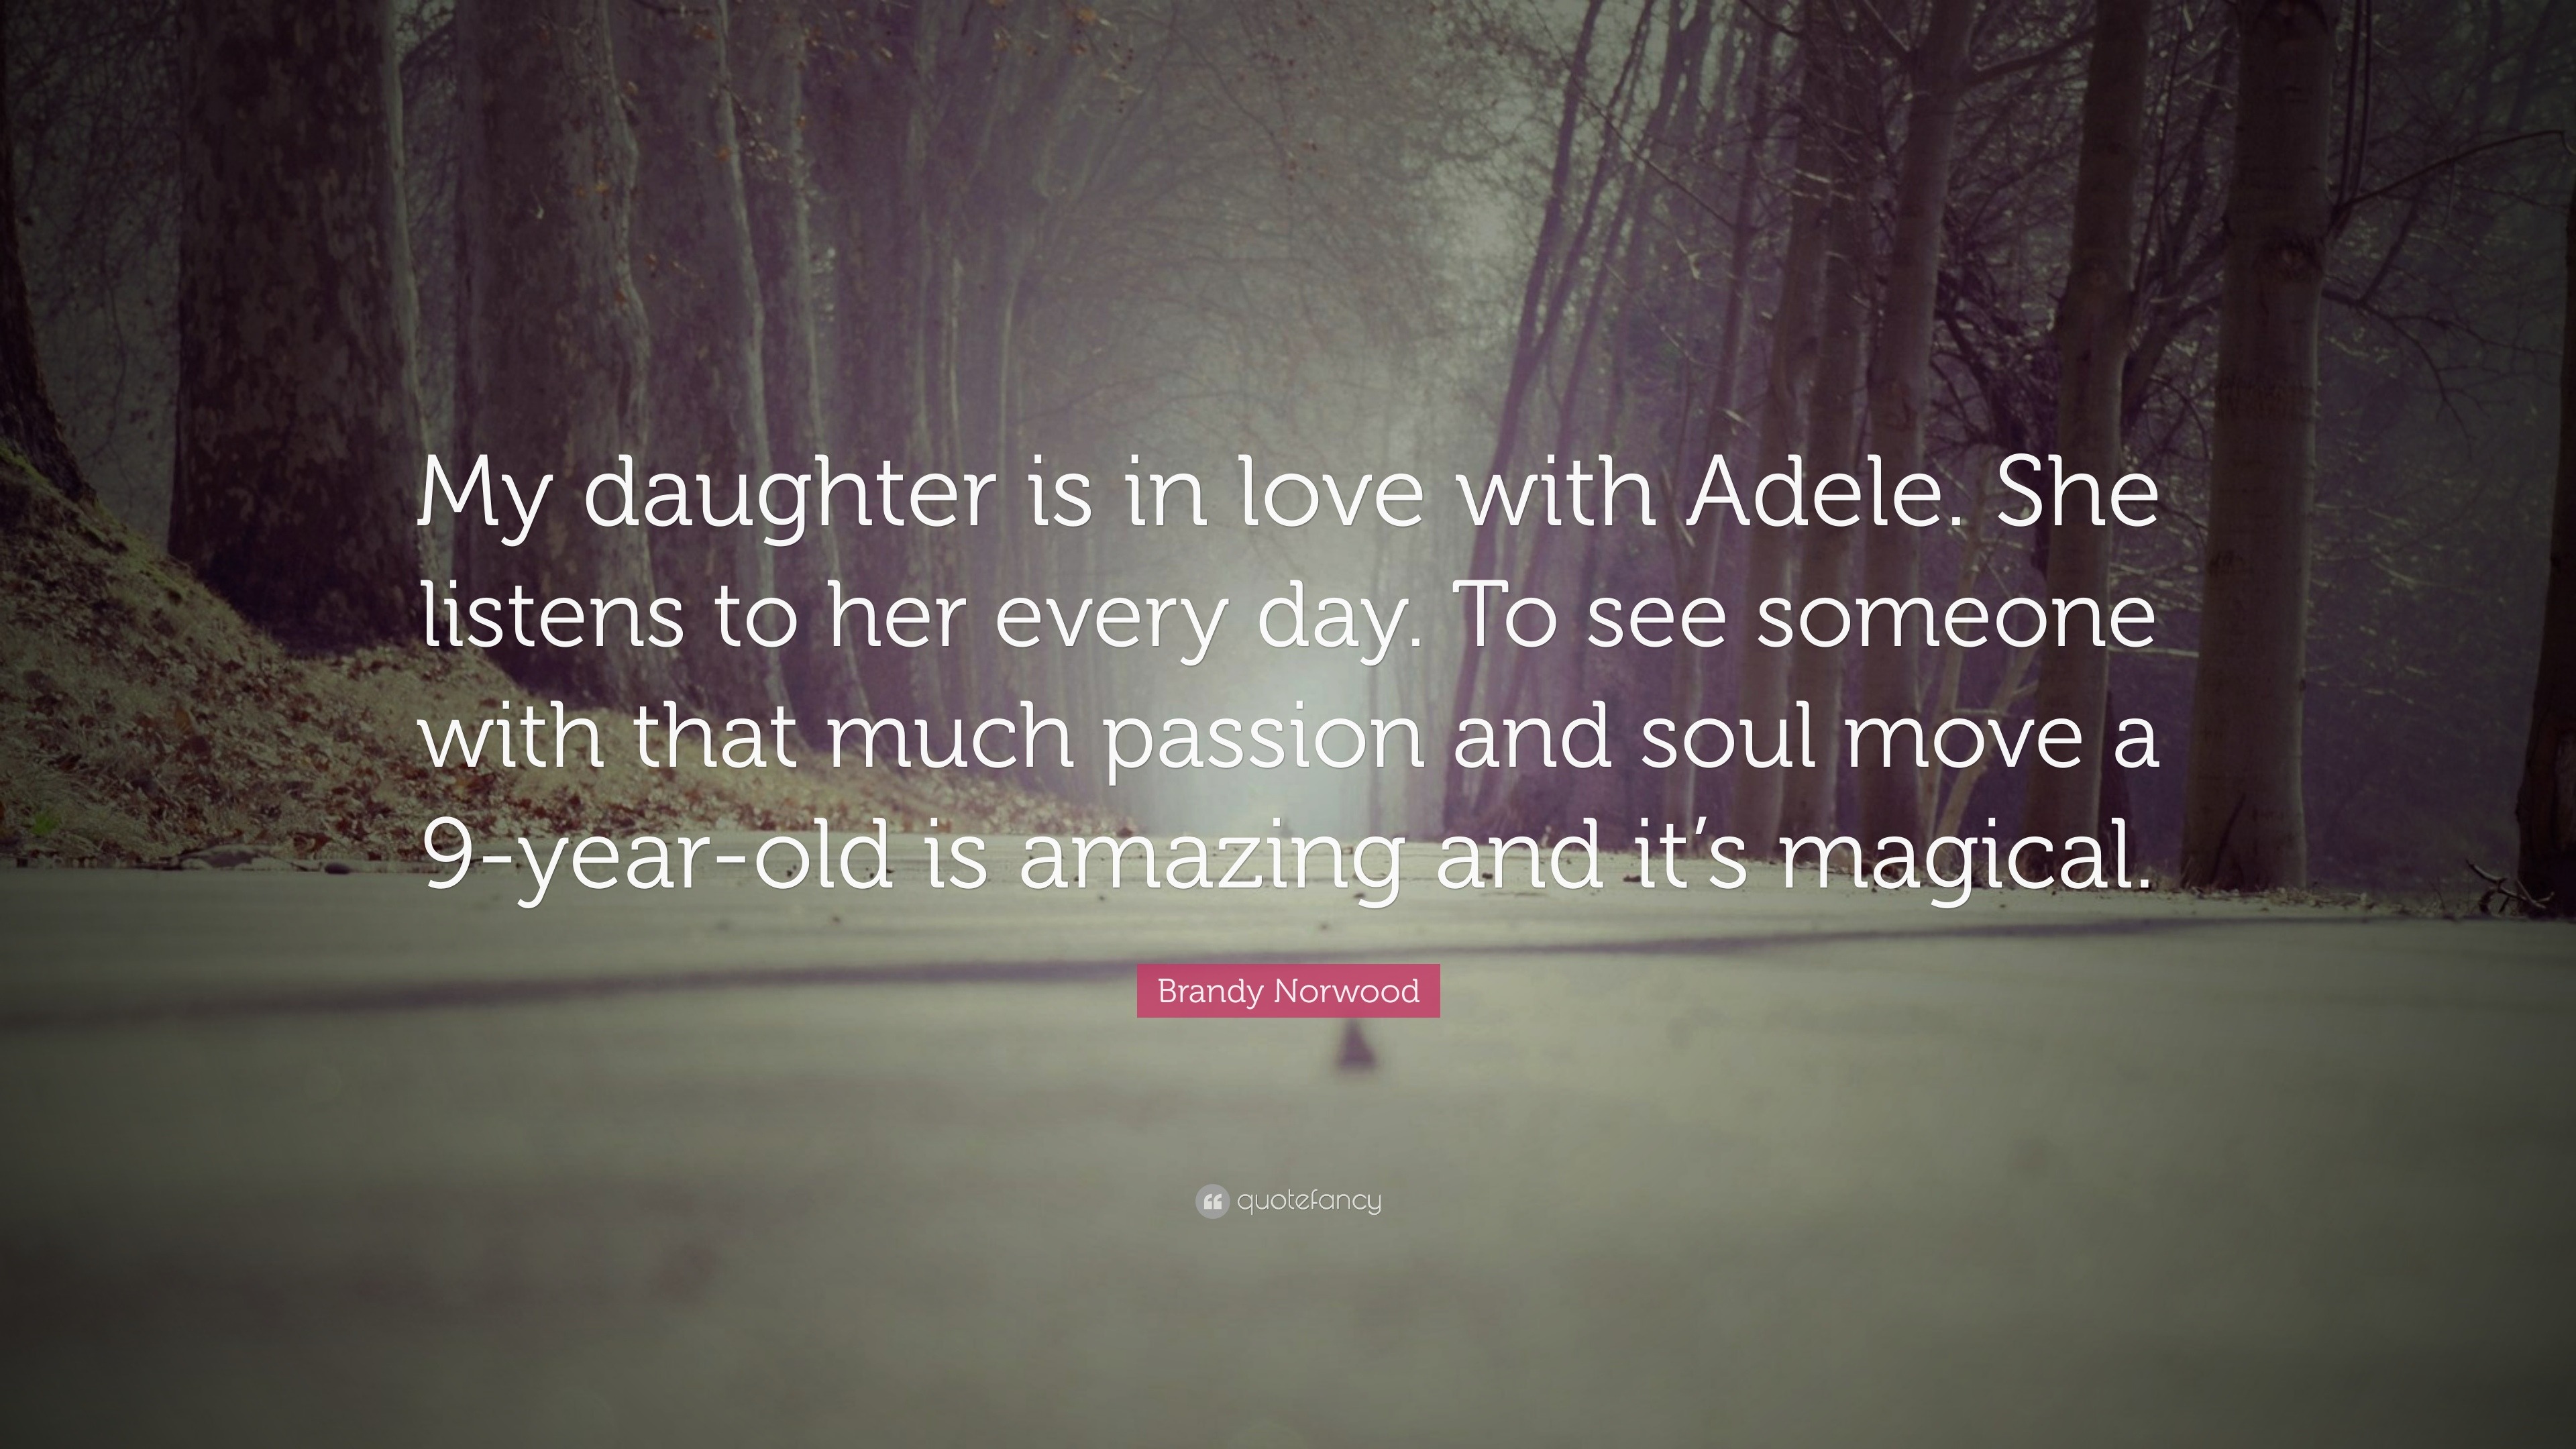 Brandy Norwood Quote “My daughter is in love with Adele She listens to